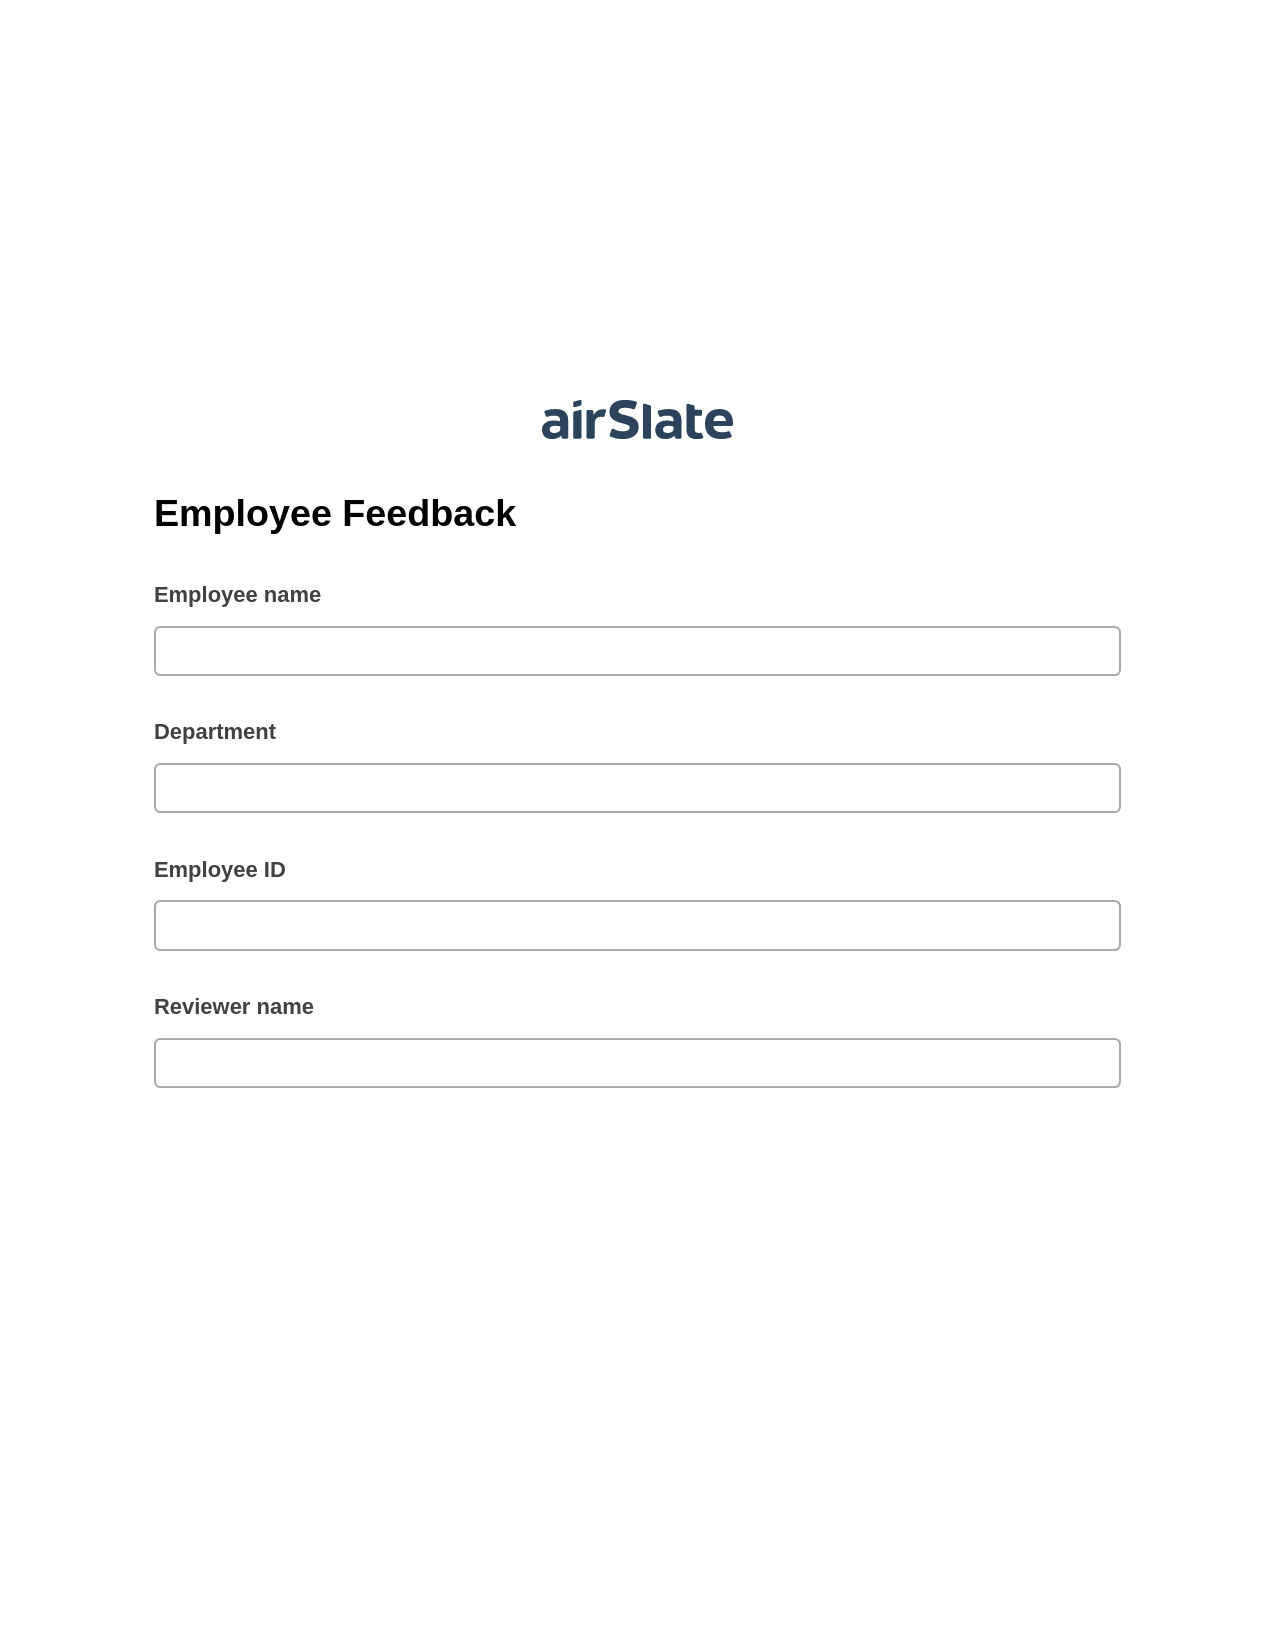 Employee Feedback Pre-fill from Salesforce Records with SOQL Bot, Unassign Role Bot, Export to Salesforce Bot